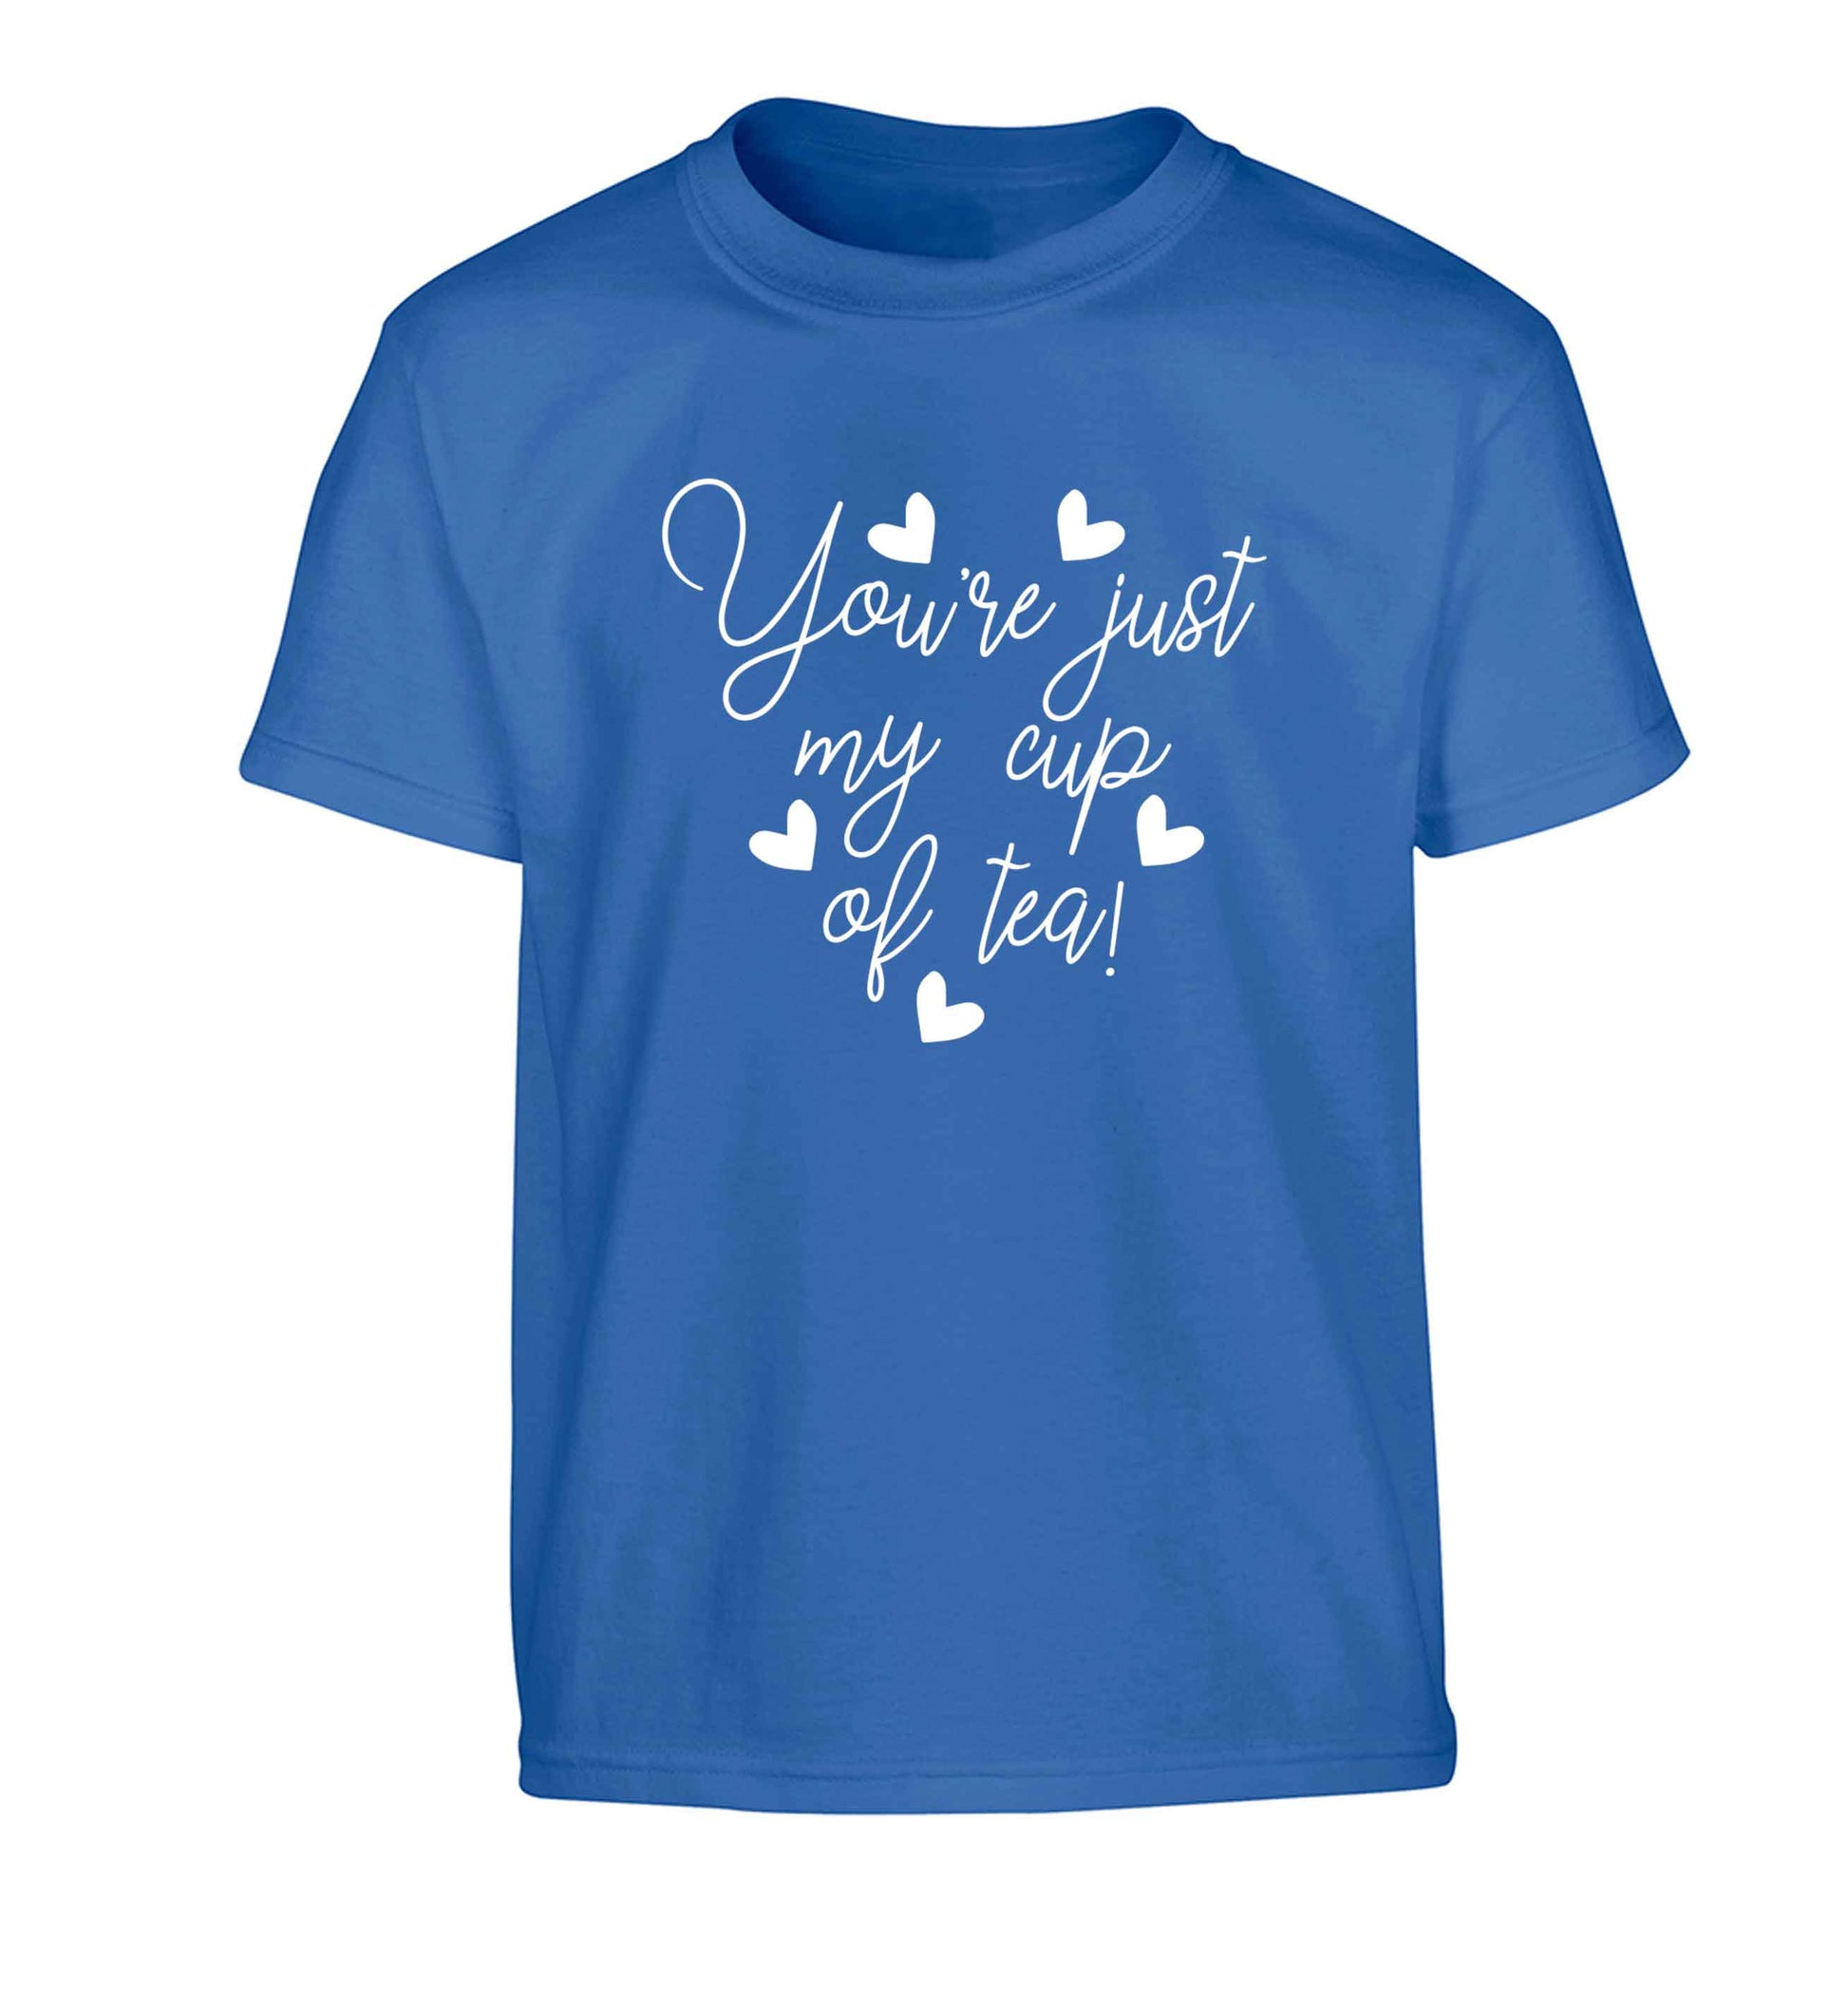 You're just my cup of tea Children's blue Tshirt 12-13 Years